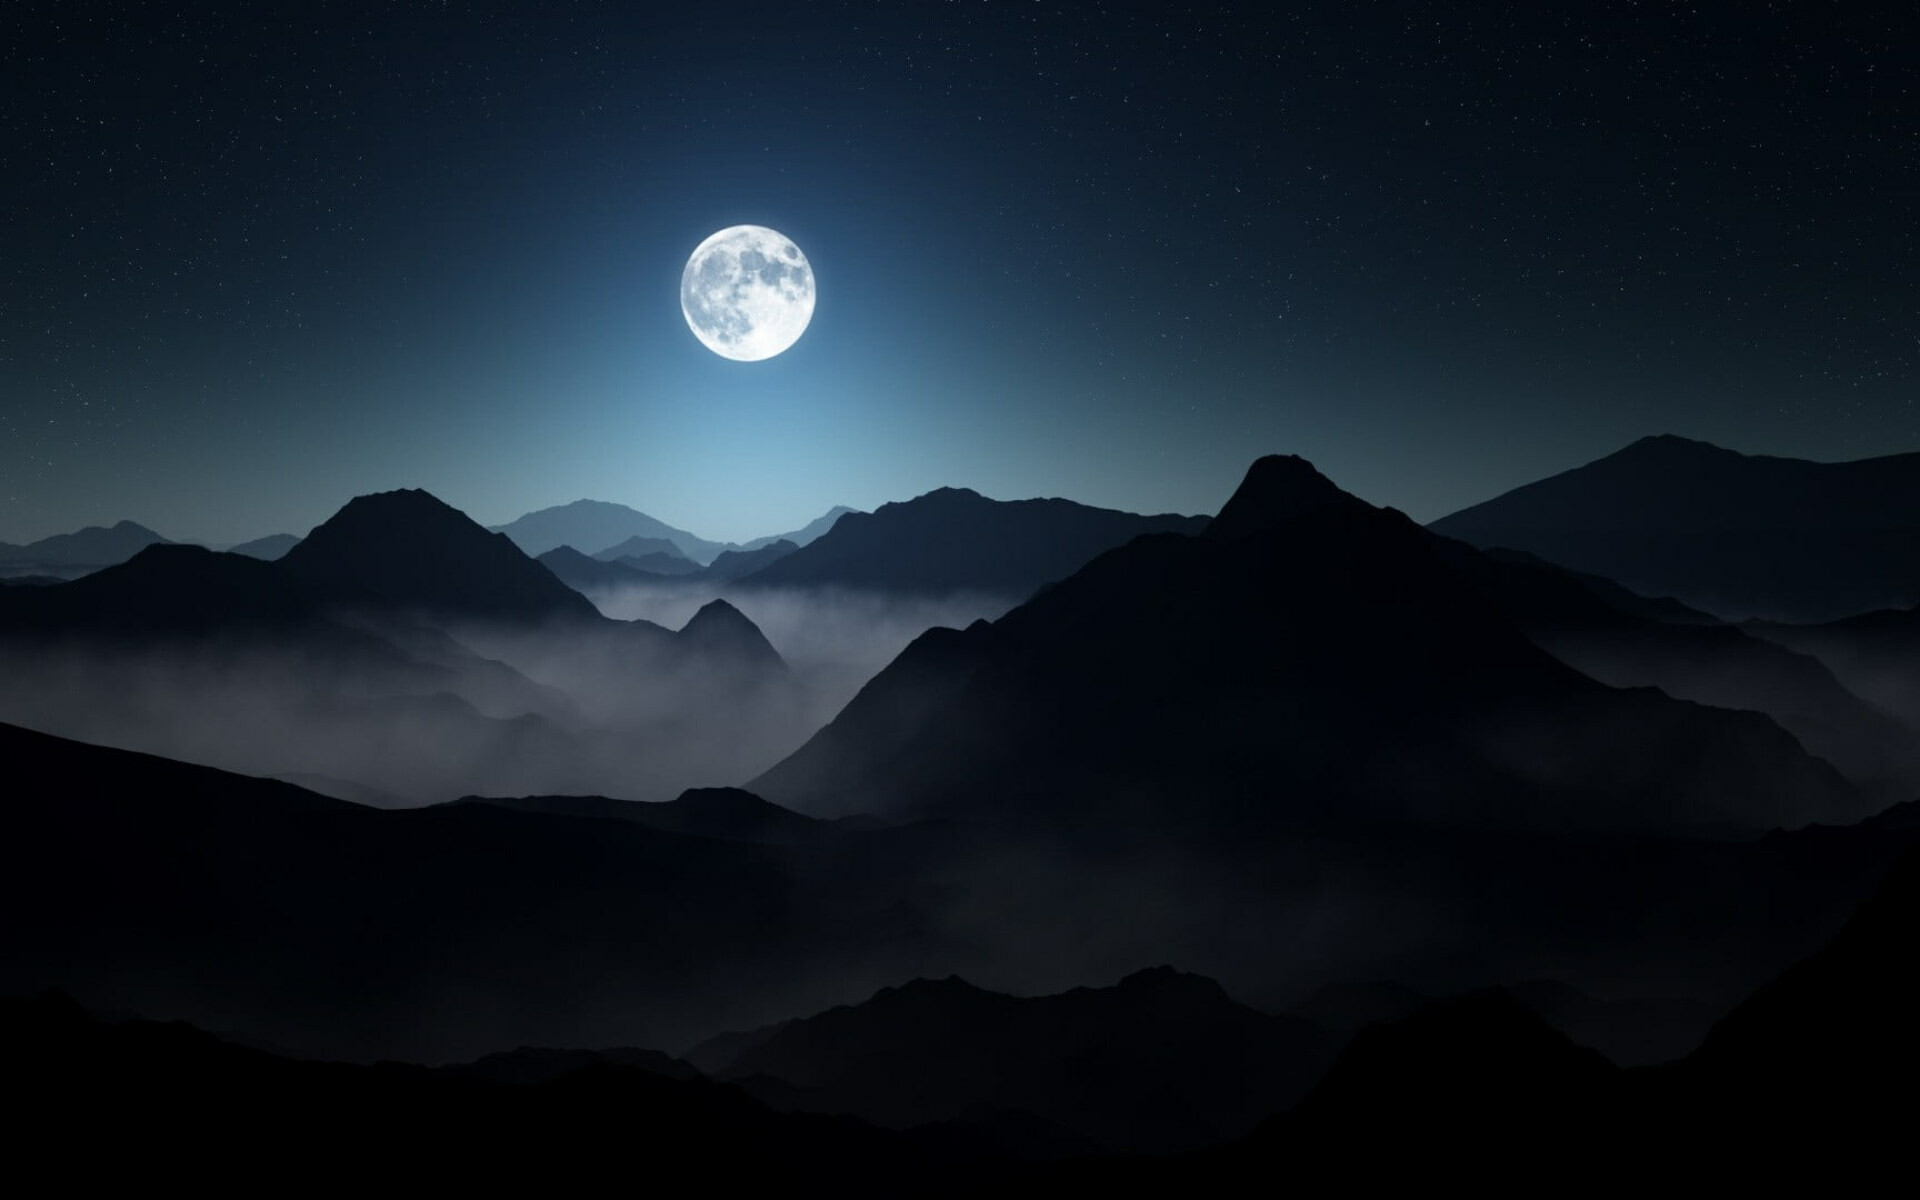 Moonlight: The Moon, Earth's only natural satellite, Night, Darkness, Landscape. 1920x1200 HD Wallpaper.